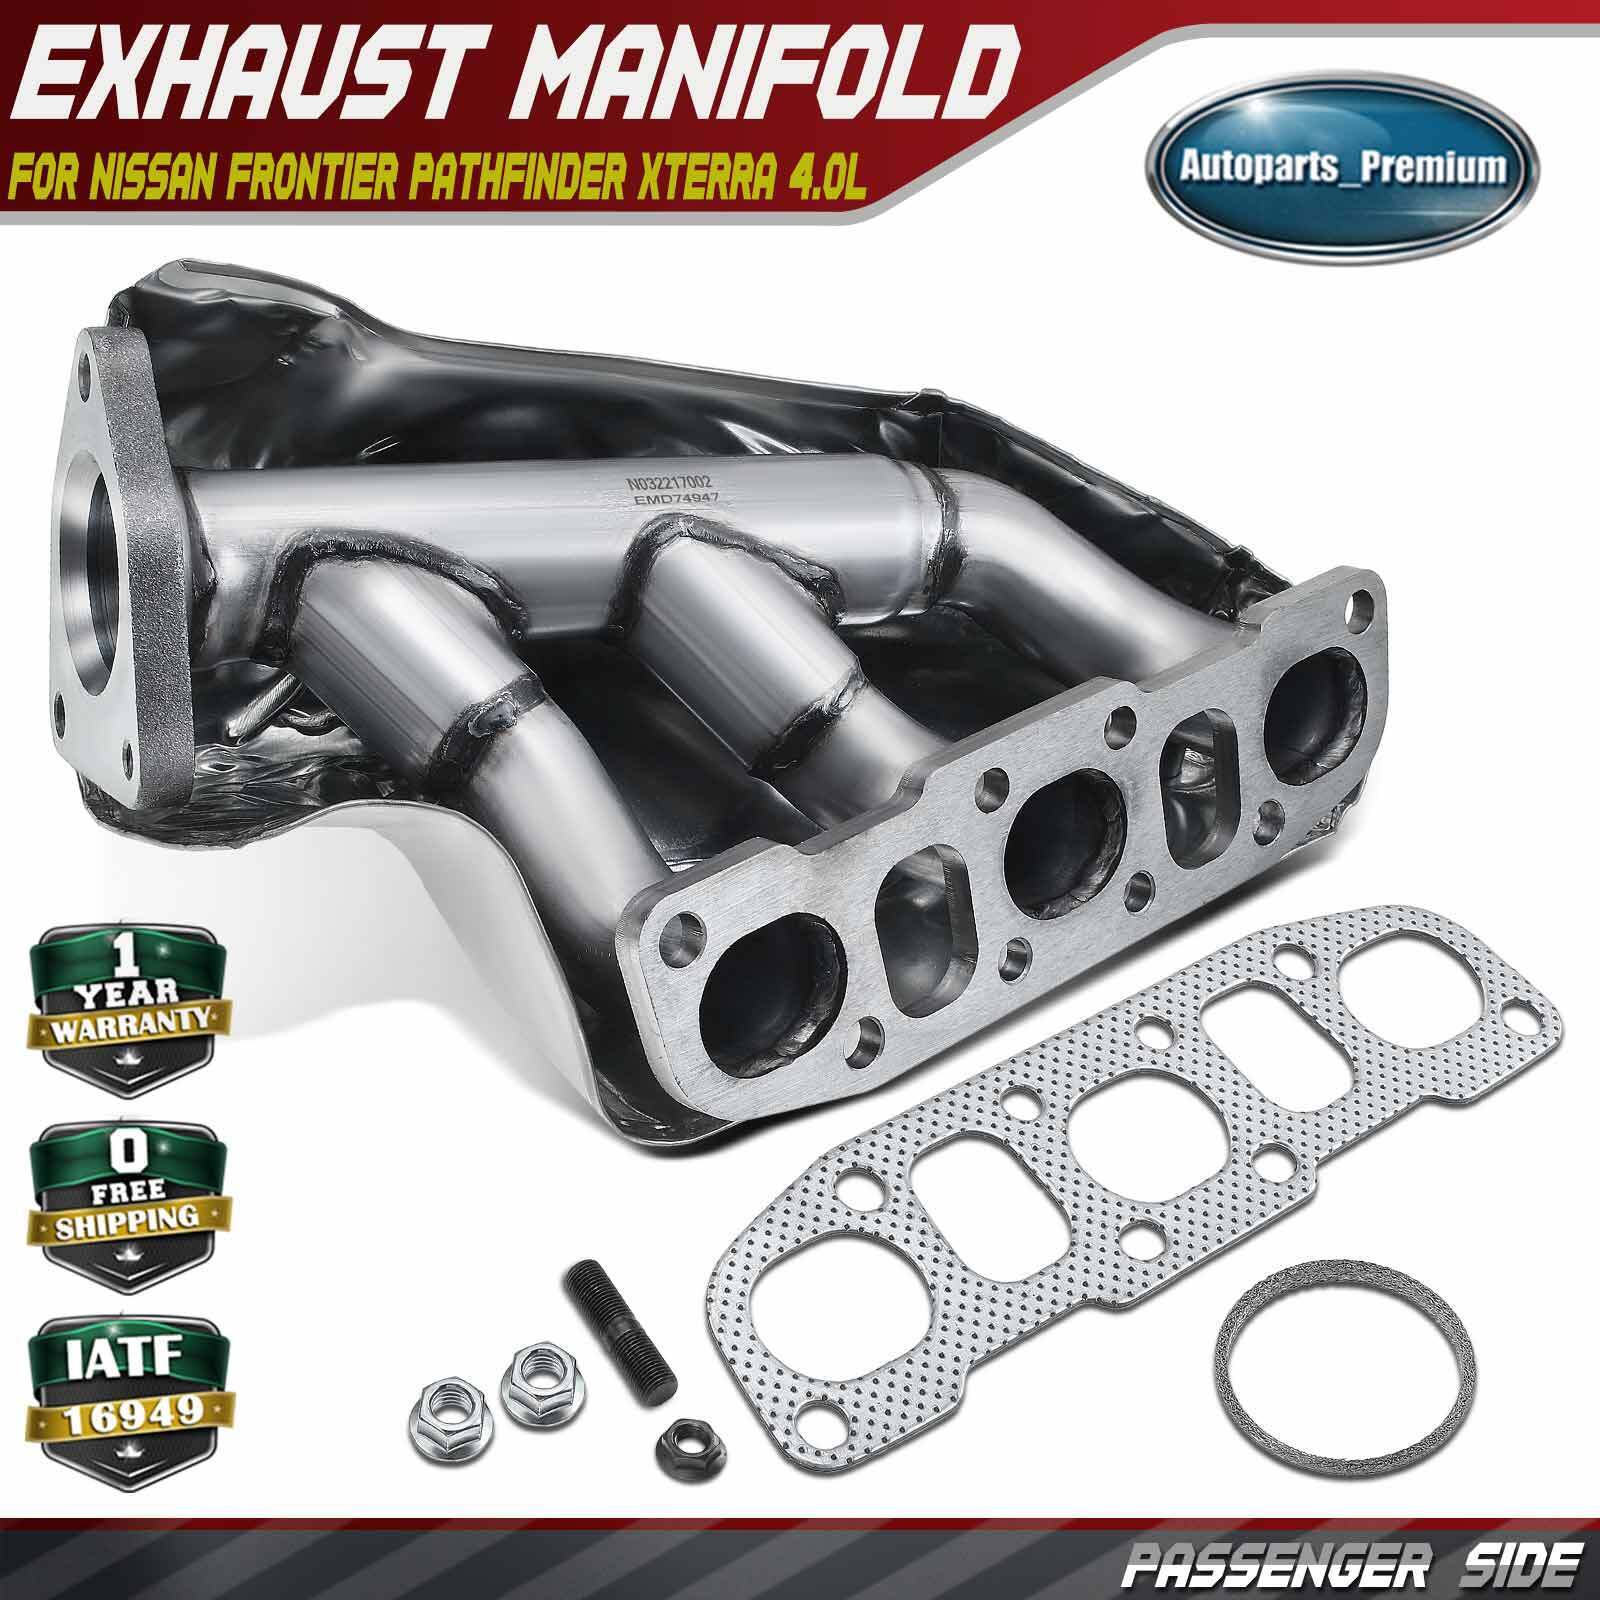 Right Exhaust Manifold w/ Gasket Kit for Nissan Frontier Pathfinder Xterra 4.0L